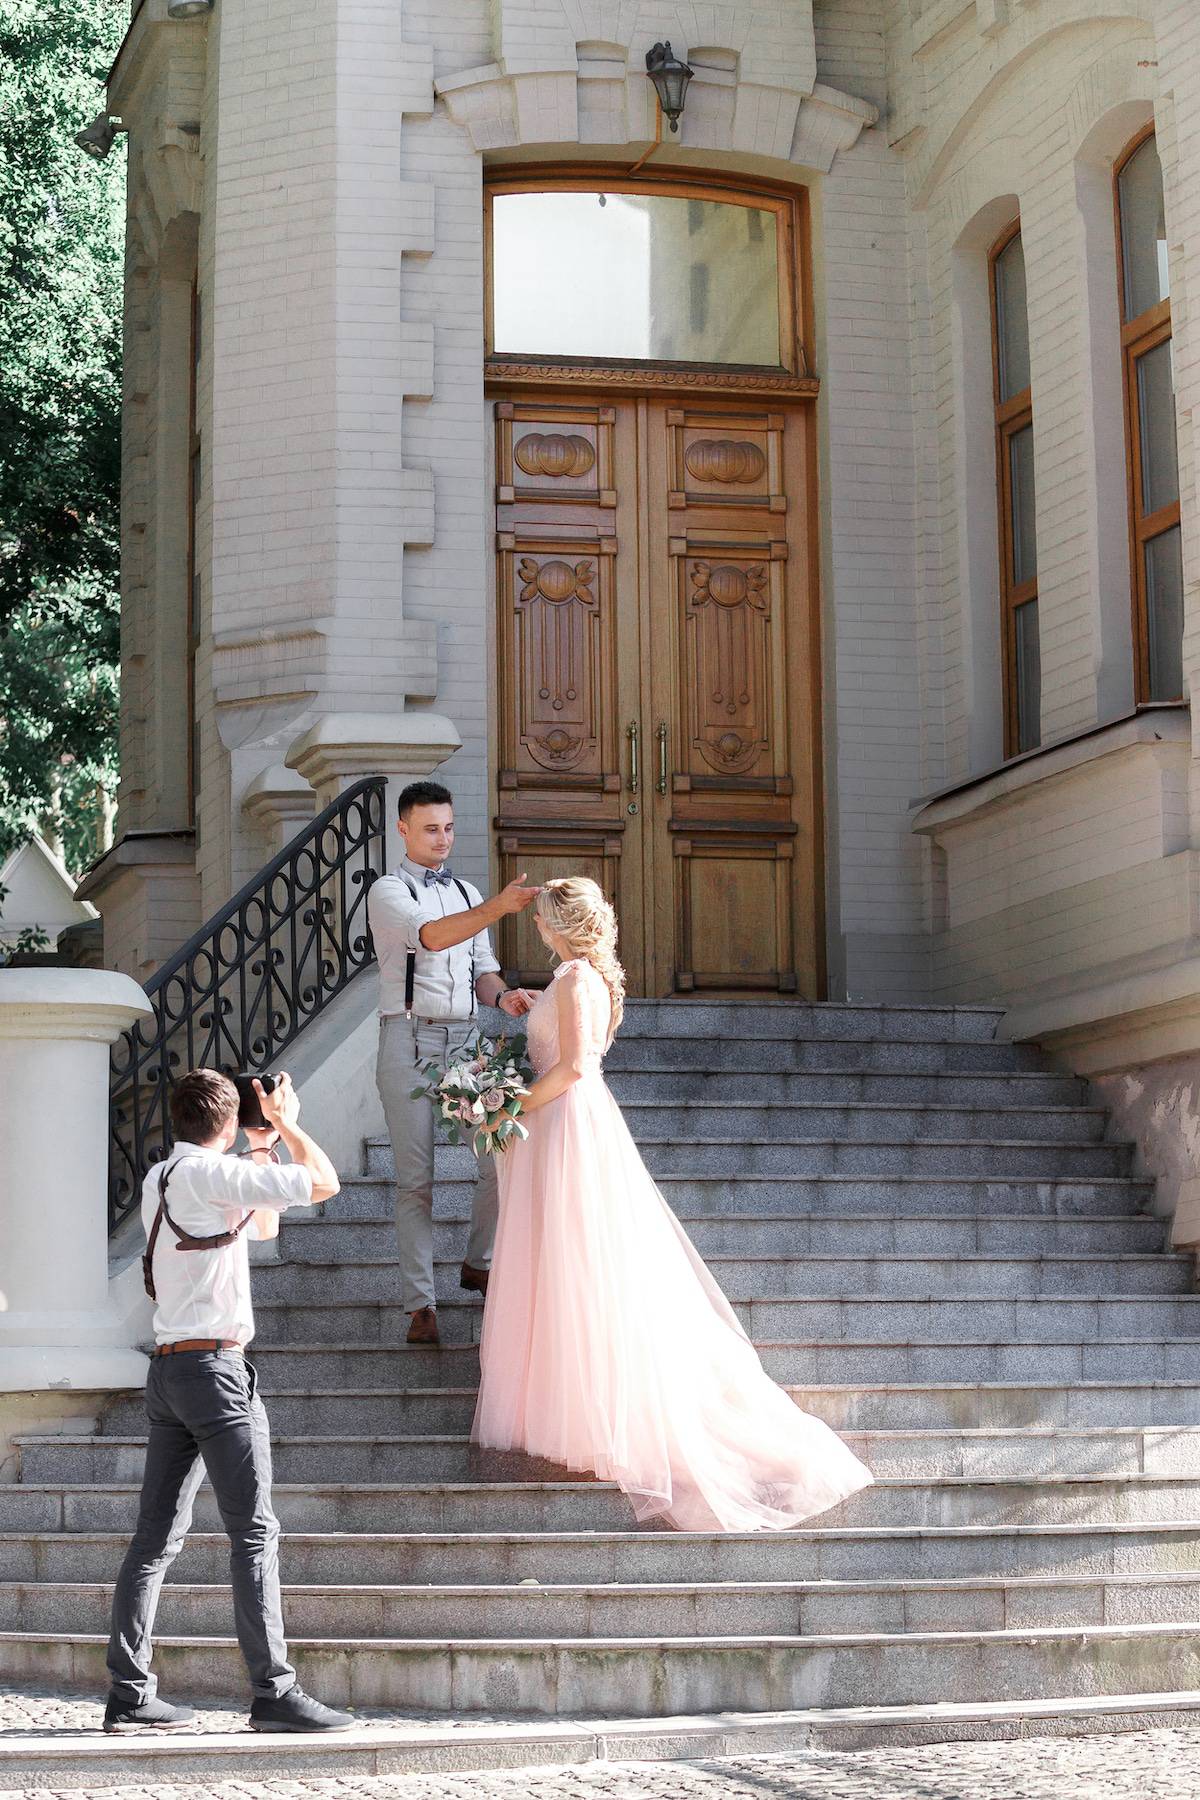 wedding photographer takes pictures of bride and groom in city. wedding couple on photo shoot. photographer in action